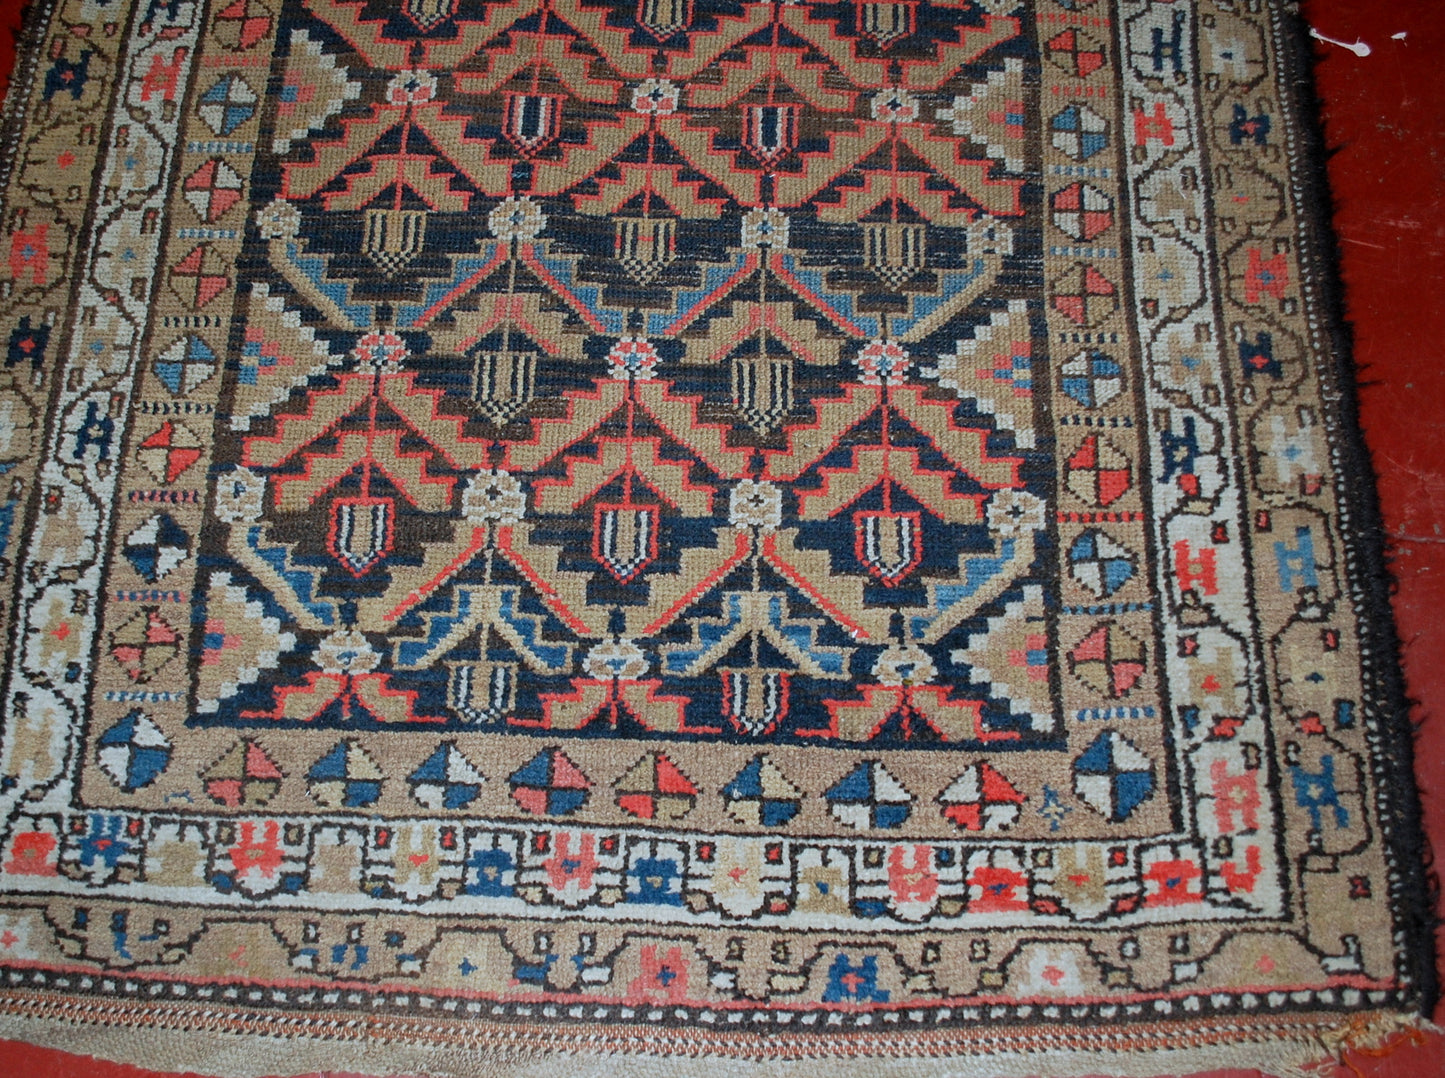 Antique Persian Hamadan rug in original condition, it has some low pile. The rug is from the Middle East region made in the beginning of 20th century.